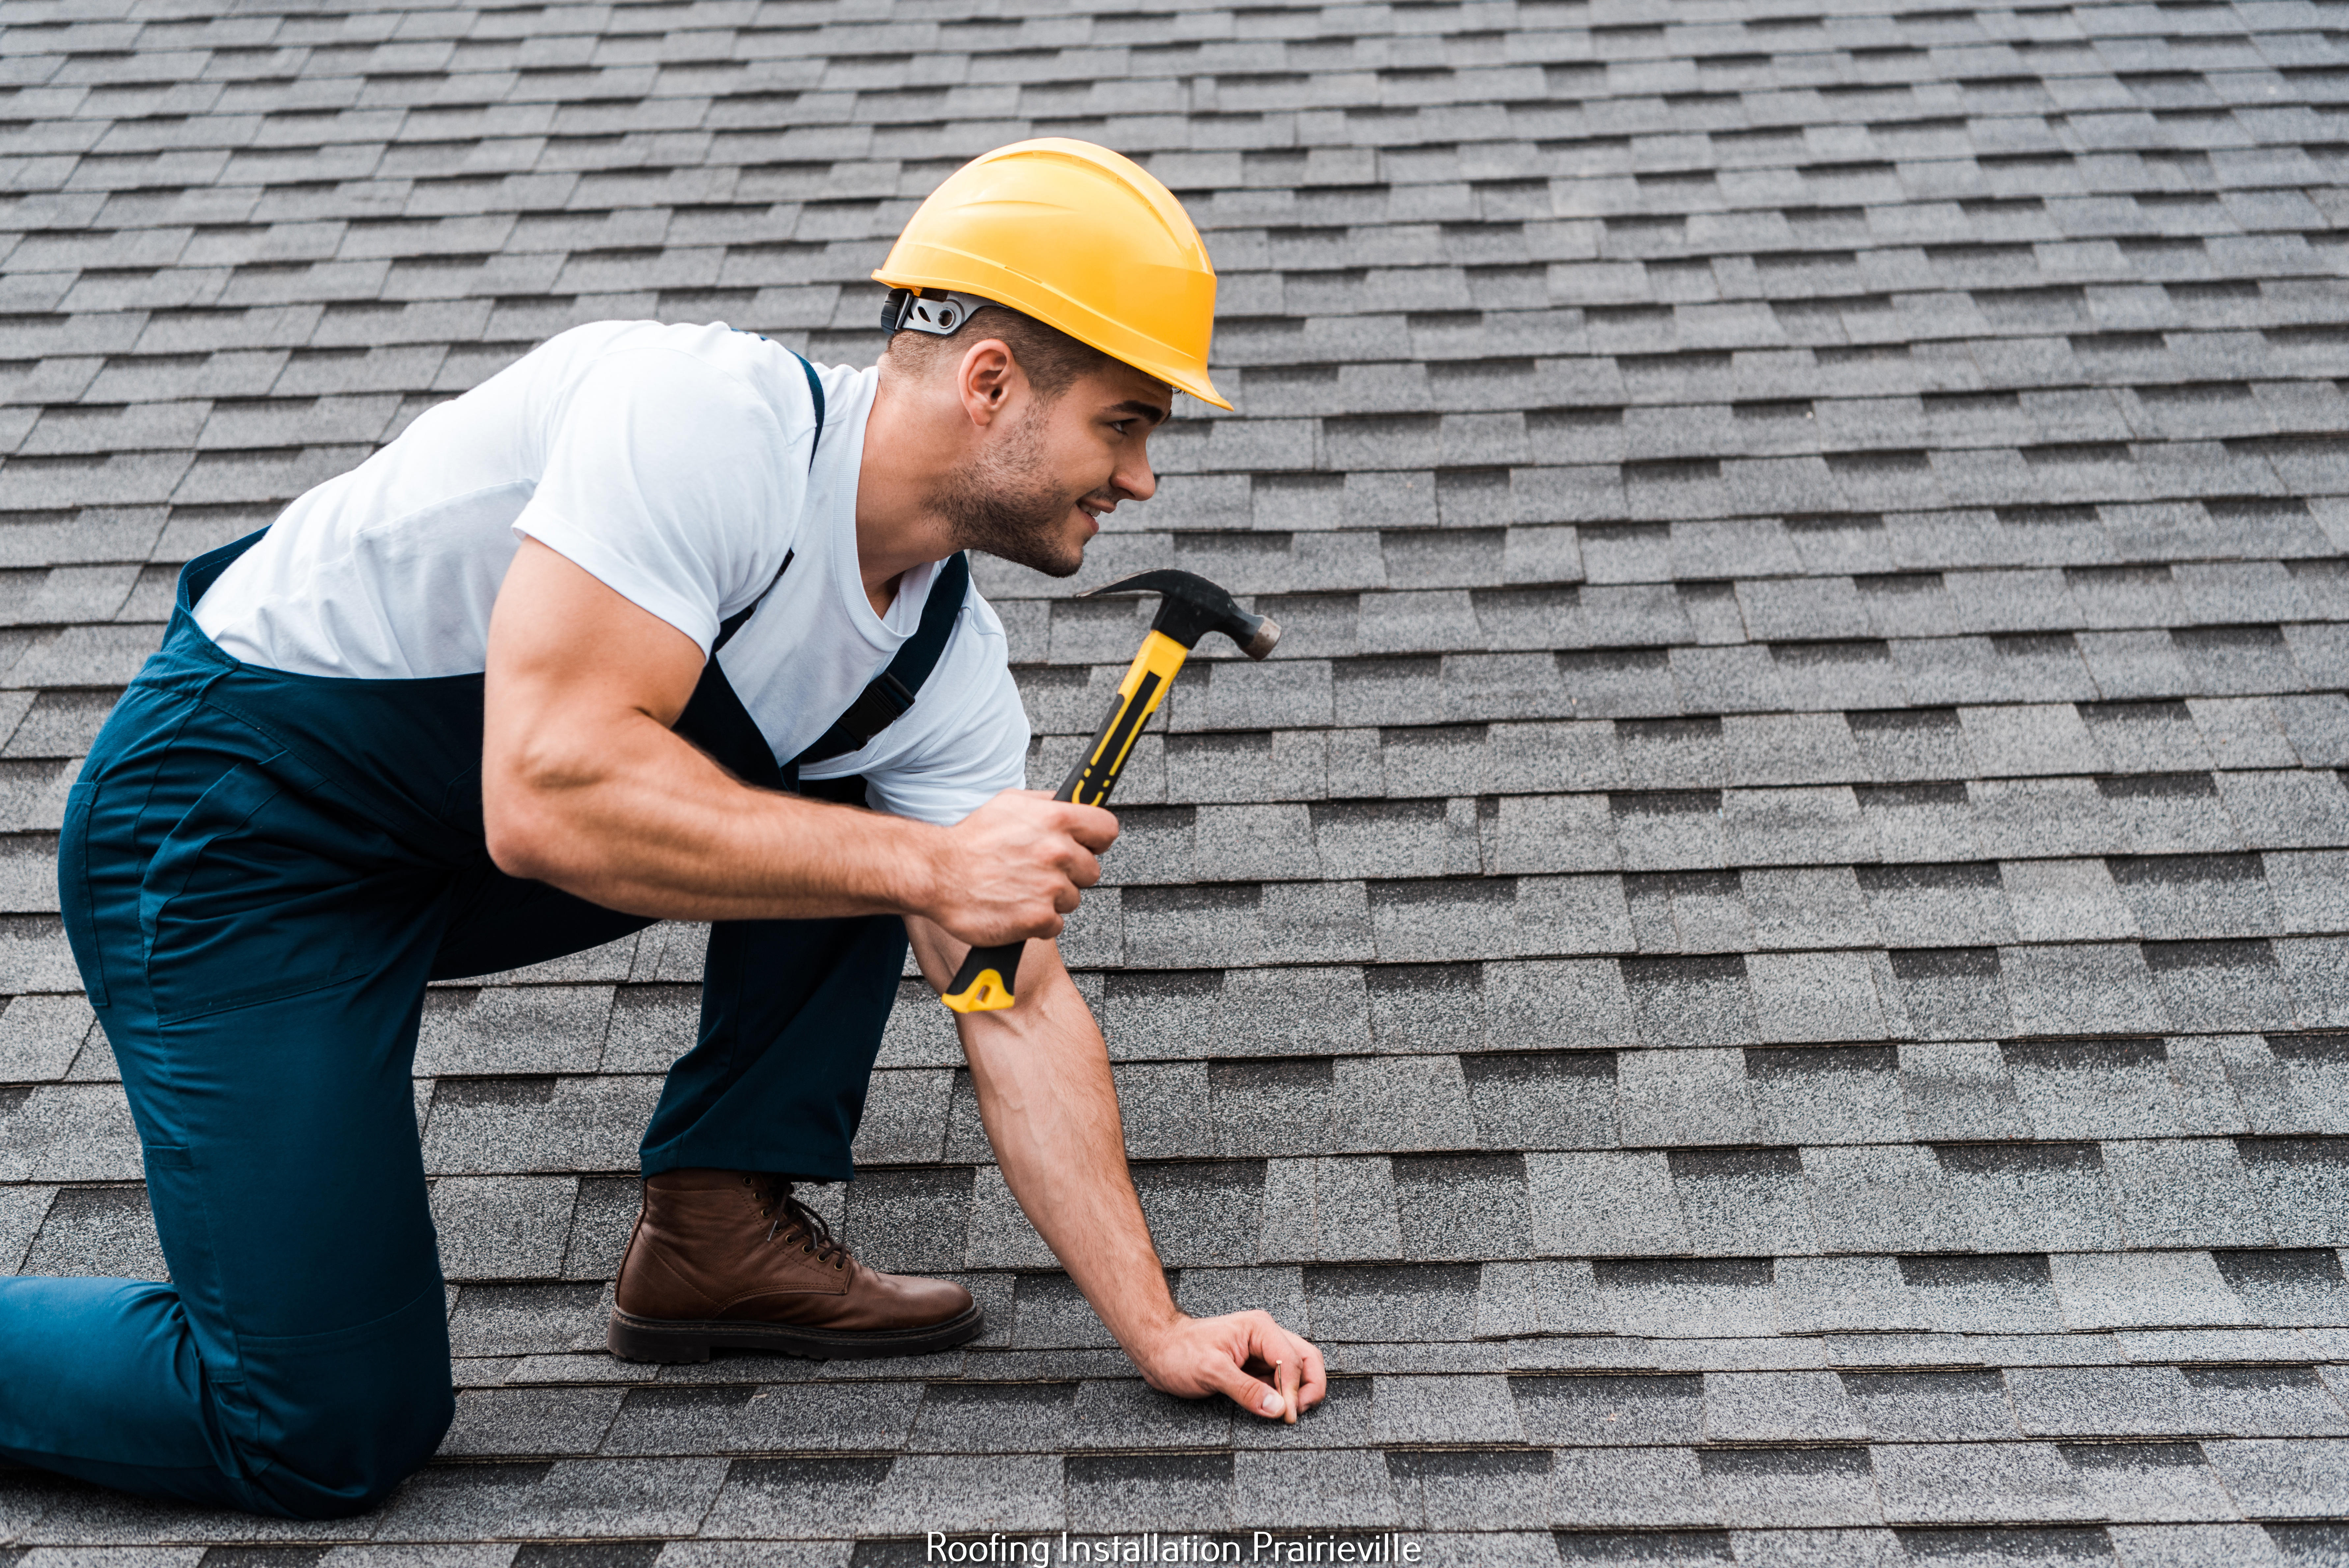 S&T Painting and Remodeling LLC Reveals Roof Safety Tips and Best Practices for Preserving and Maintaining Roof 